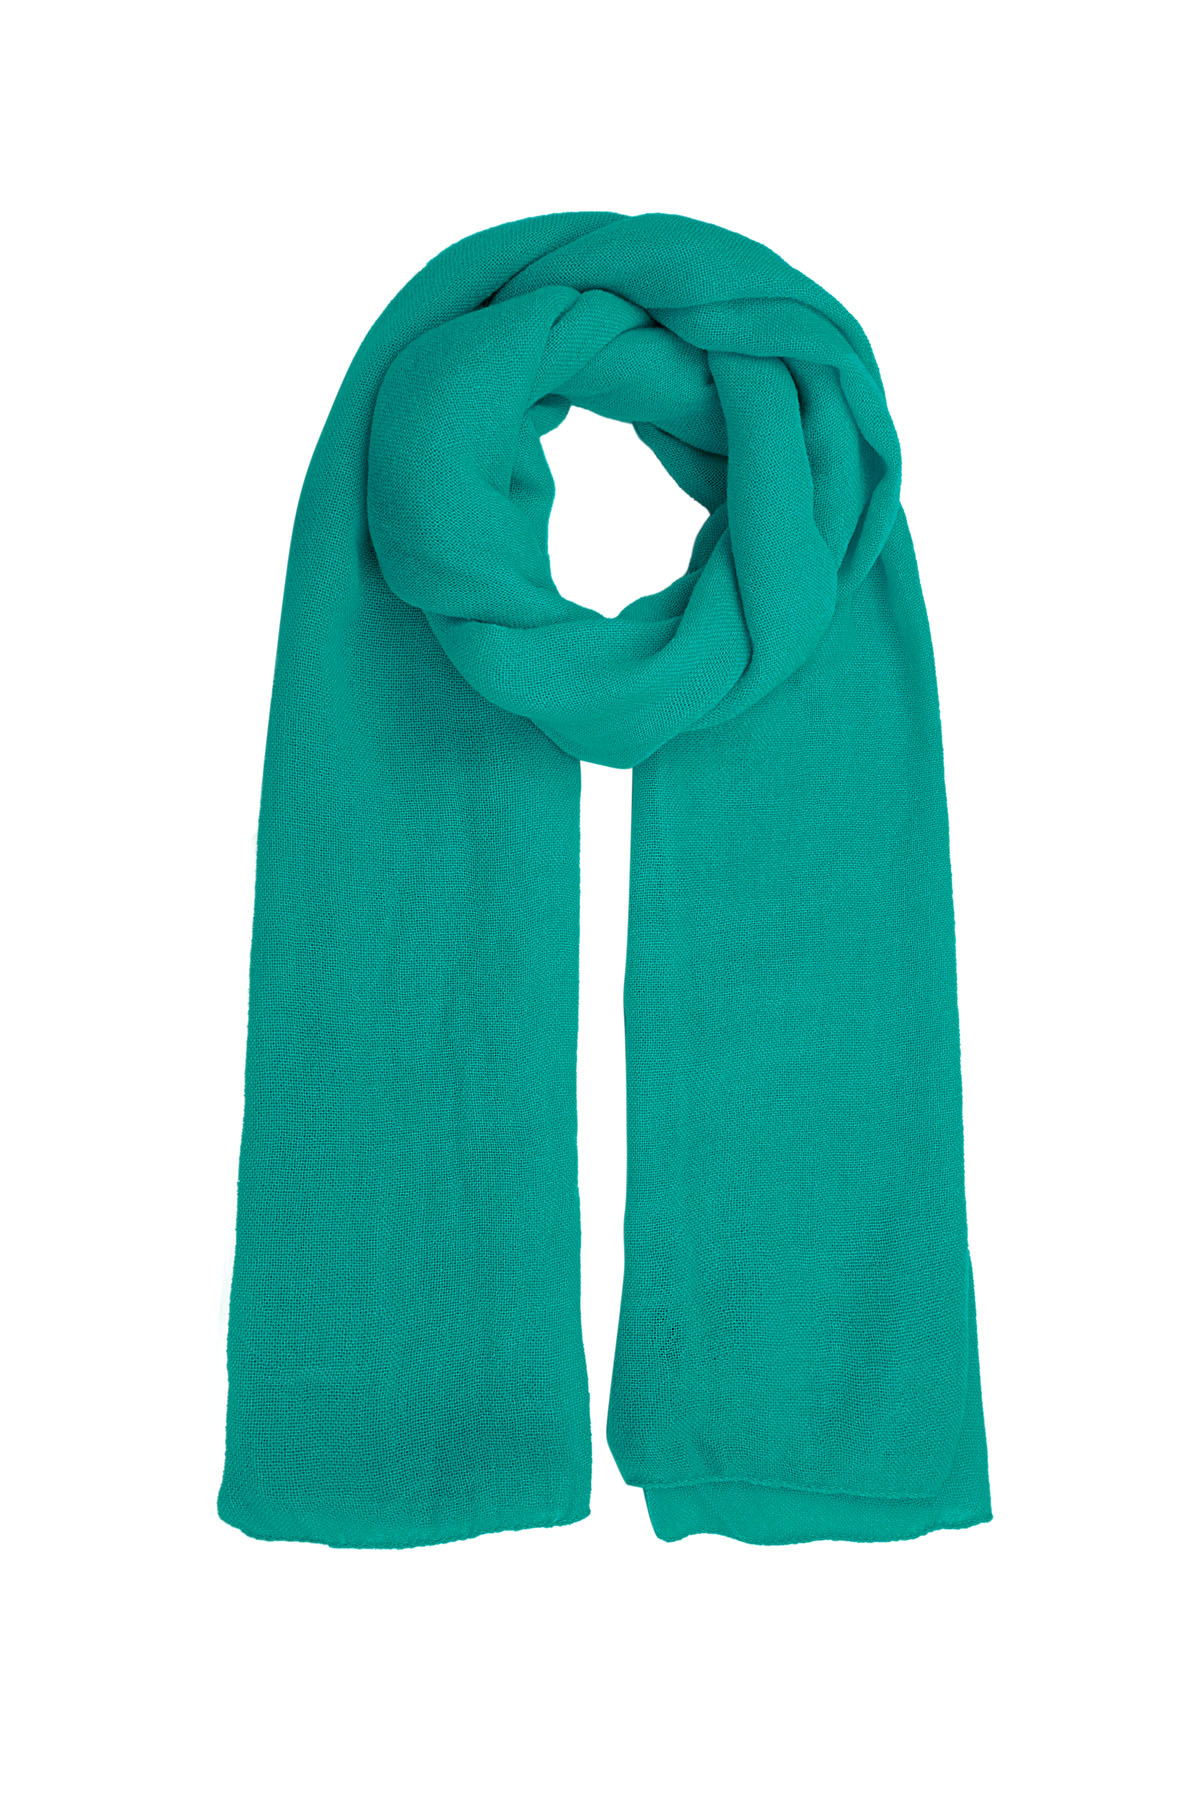 Scarf solid color - turquoise 